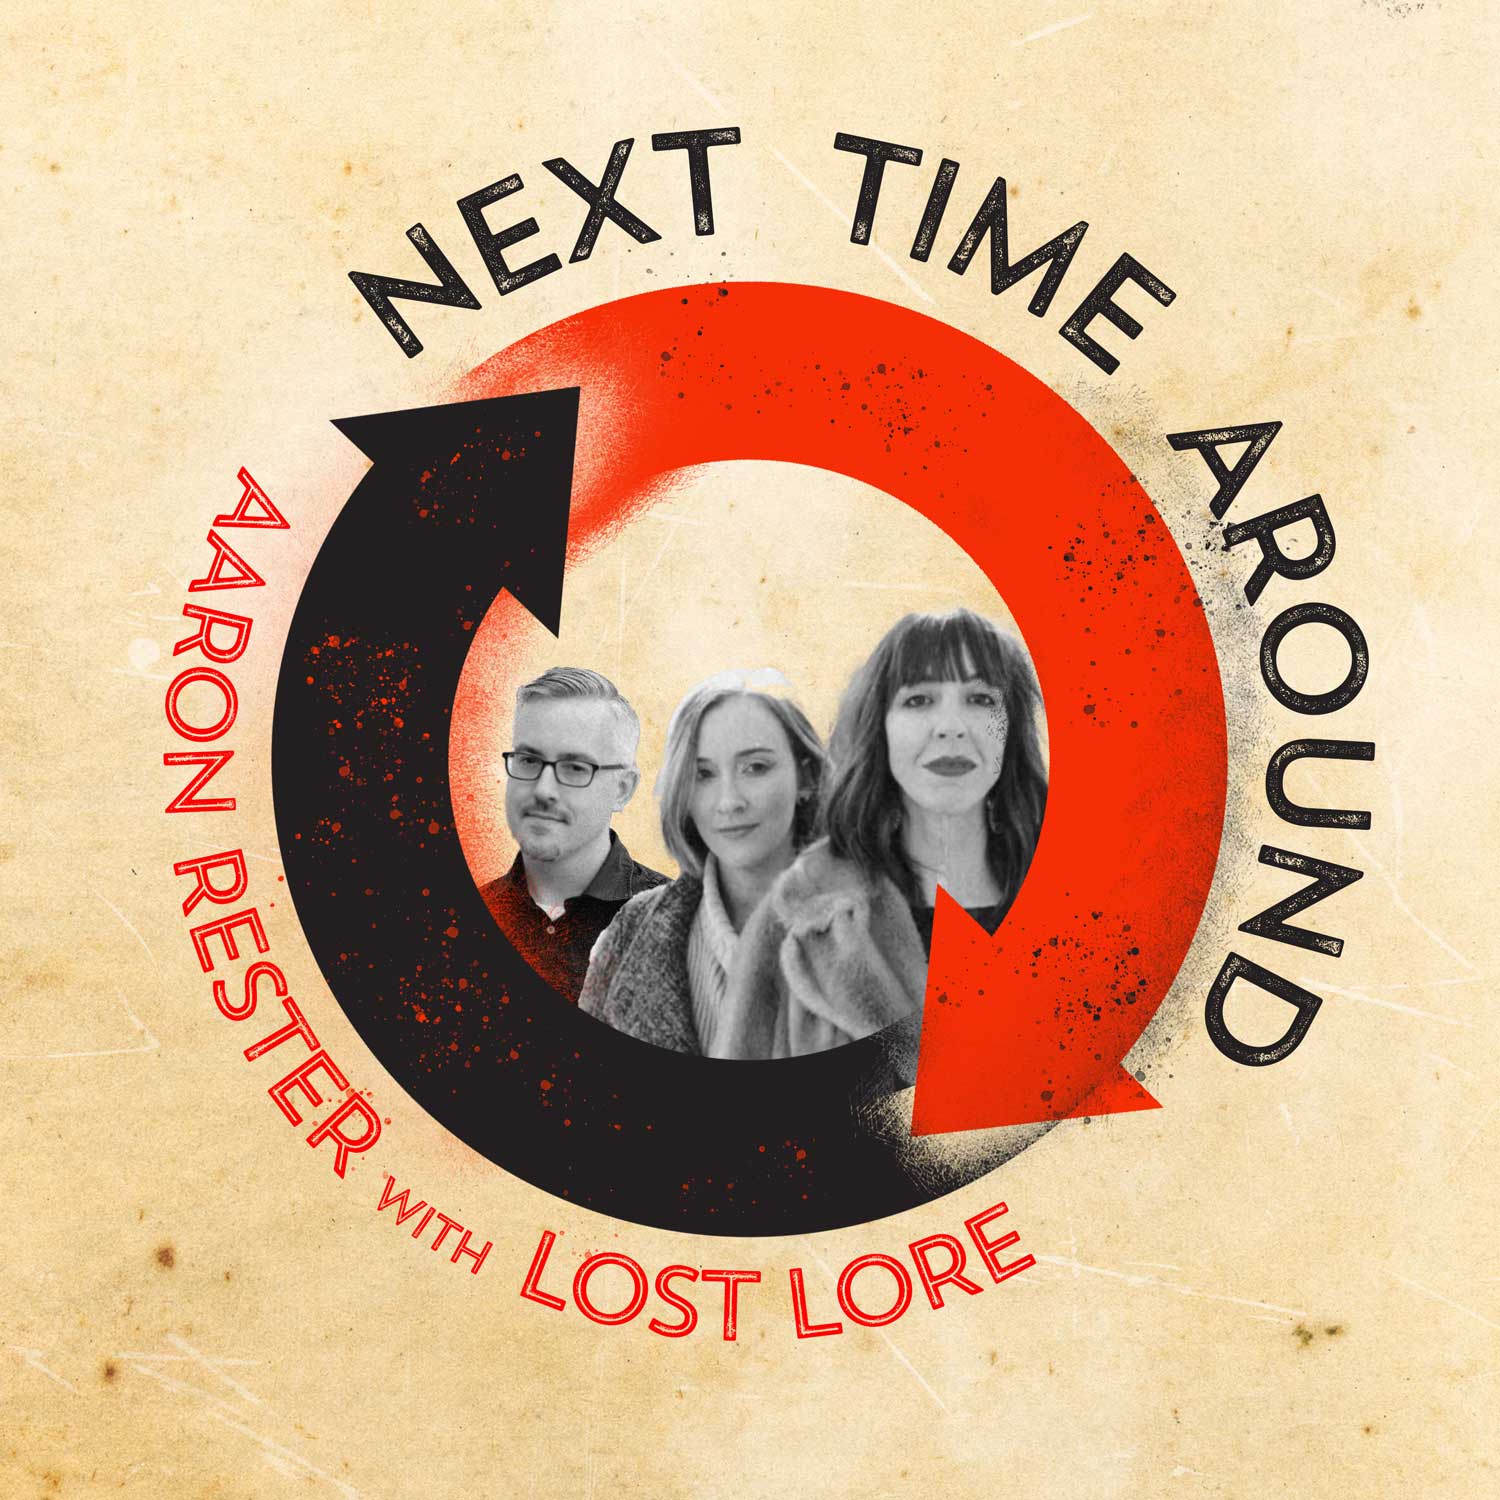 Next Time Around by Aaron Rester (feat. Lost Lore)